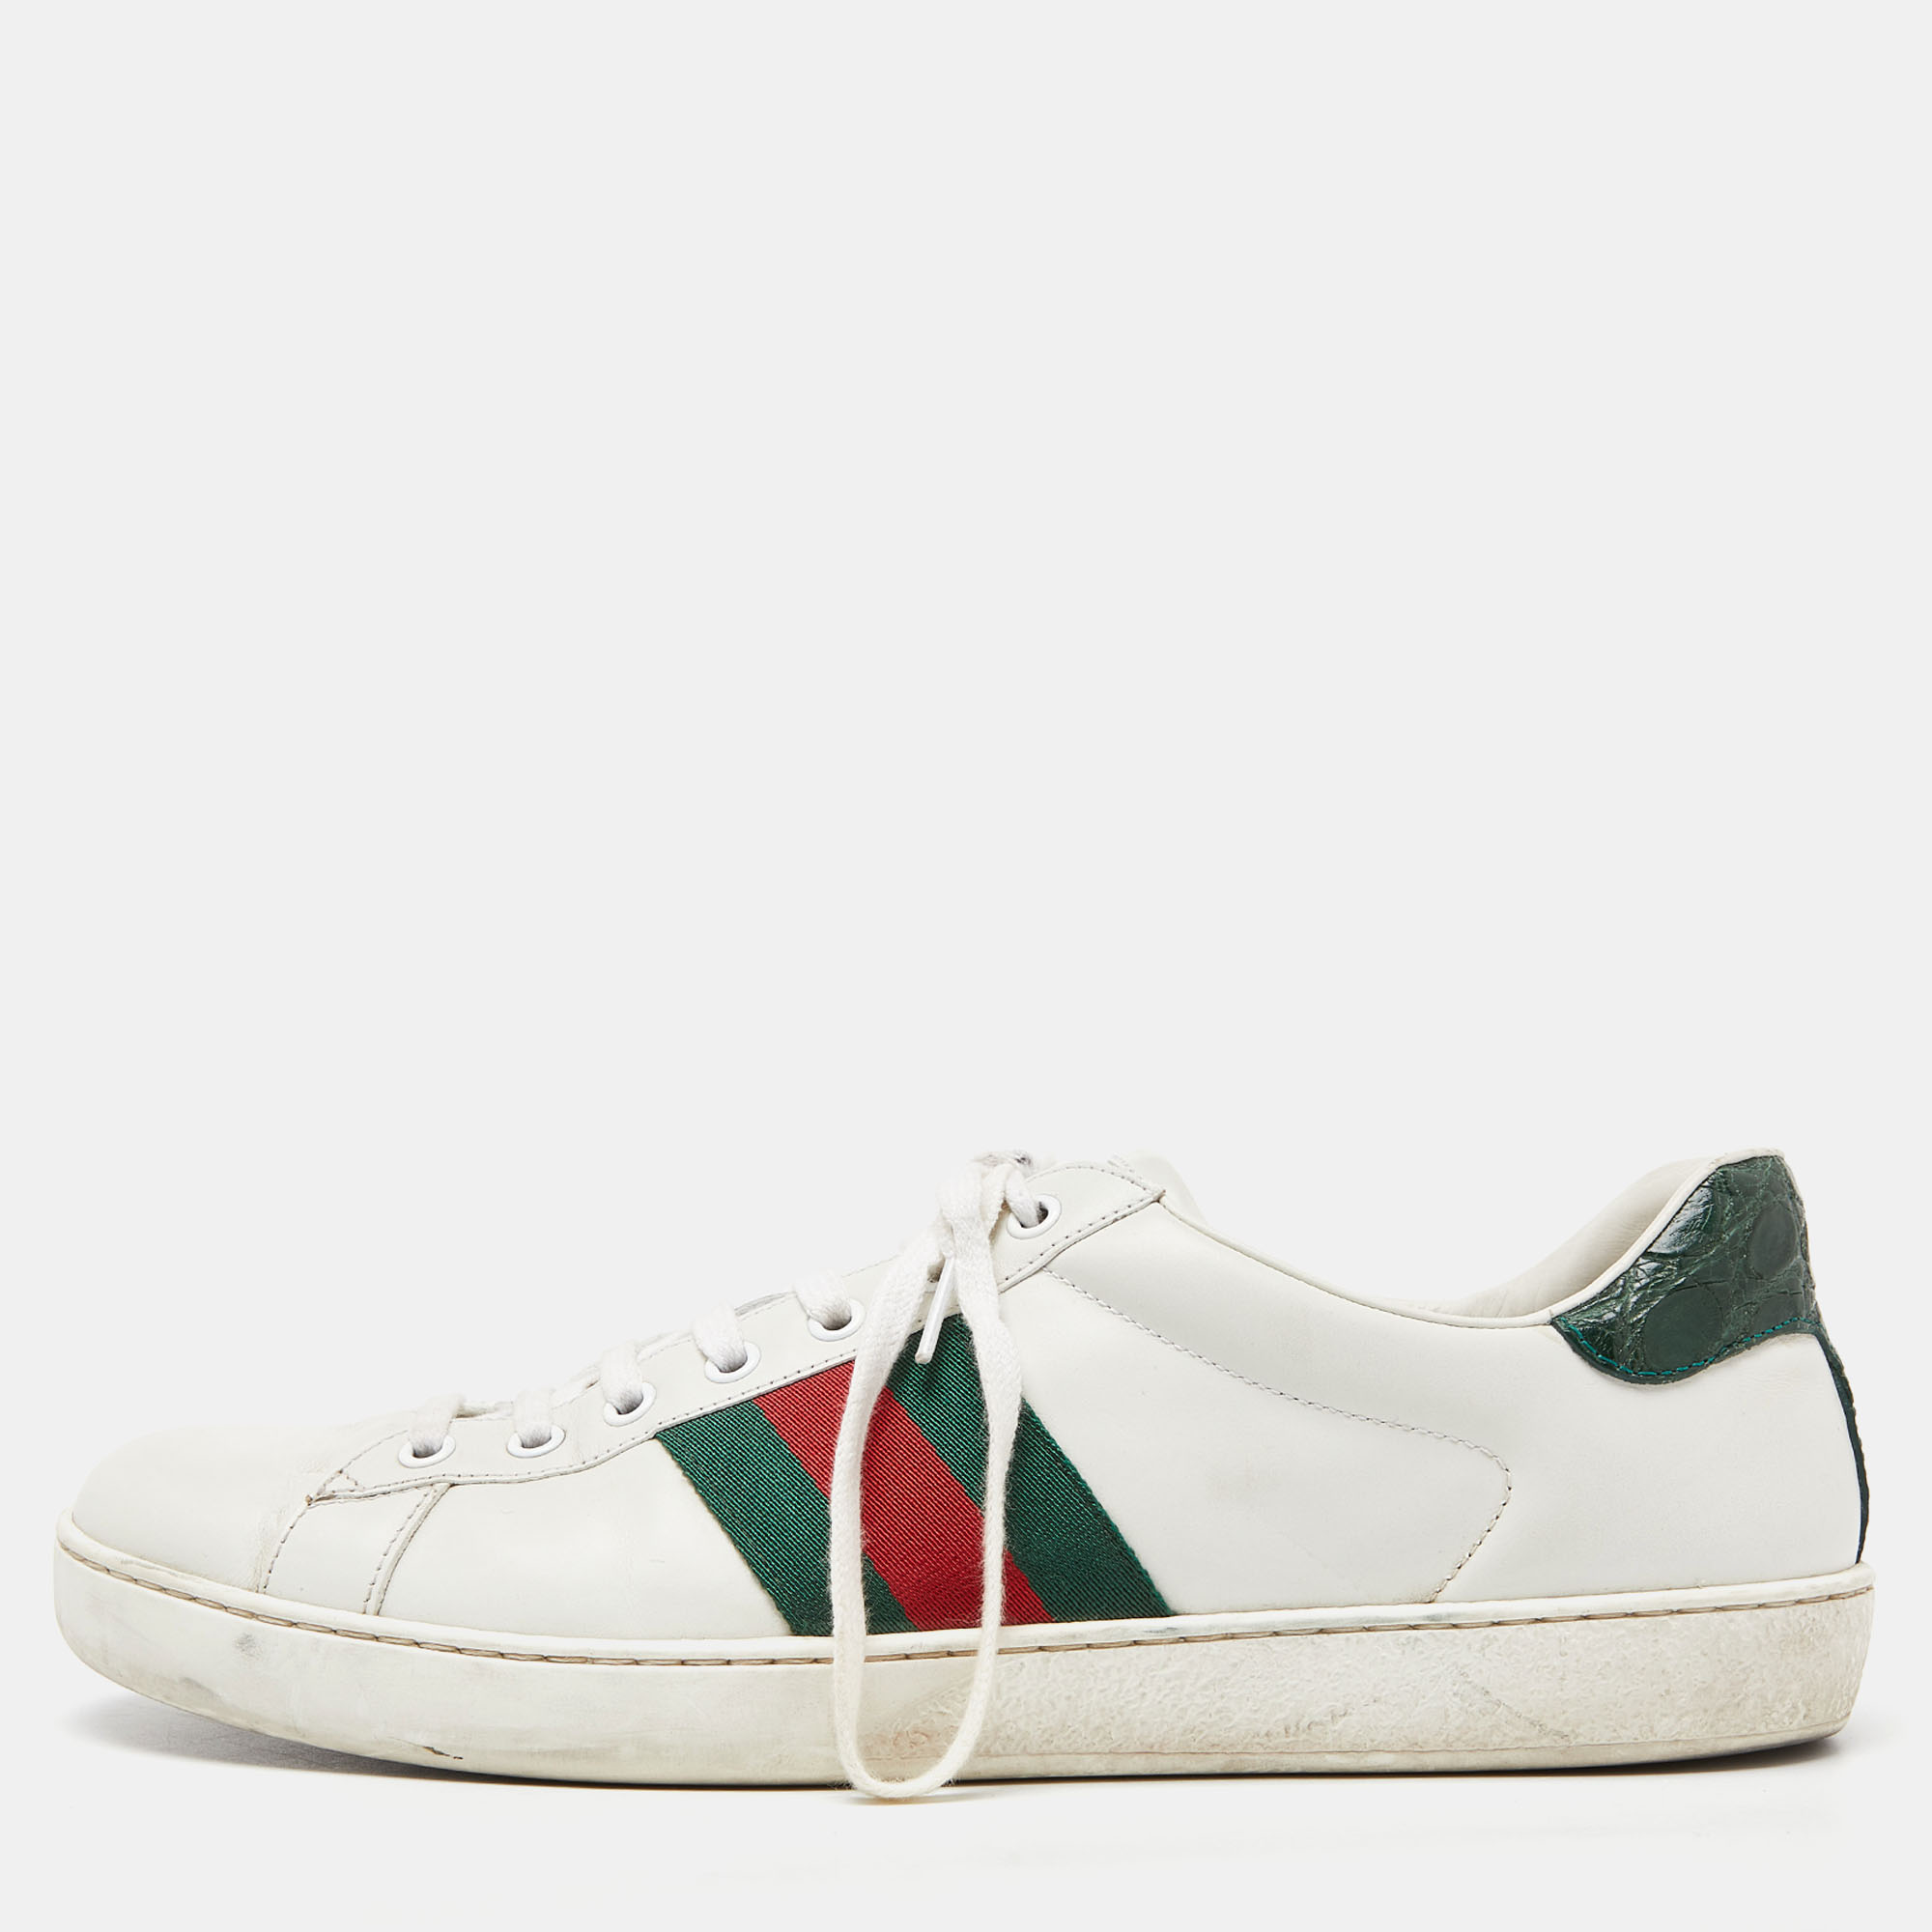 Stacked with signature details this Gucci pair is rendered in leather and is designed in a low cut style with lace up vamps. They have been fashioned with iconic web stripes. Complete with contrasting trims carrying the brand label on the counters these shoes can be easily coordinated with your casuals.